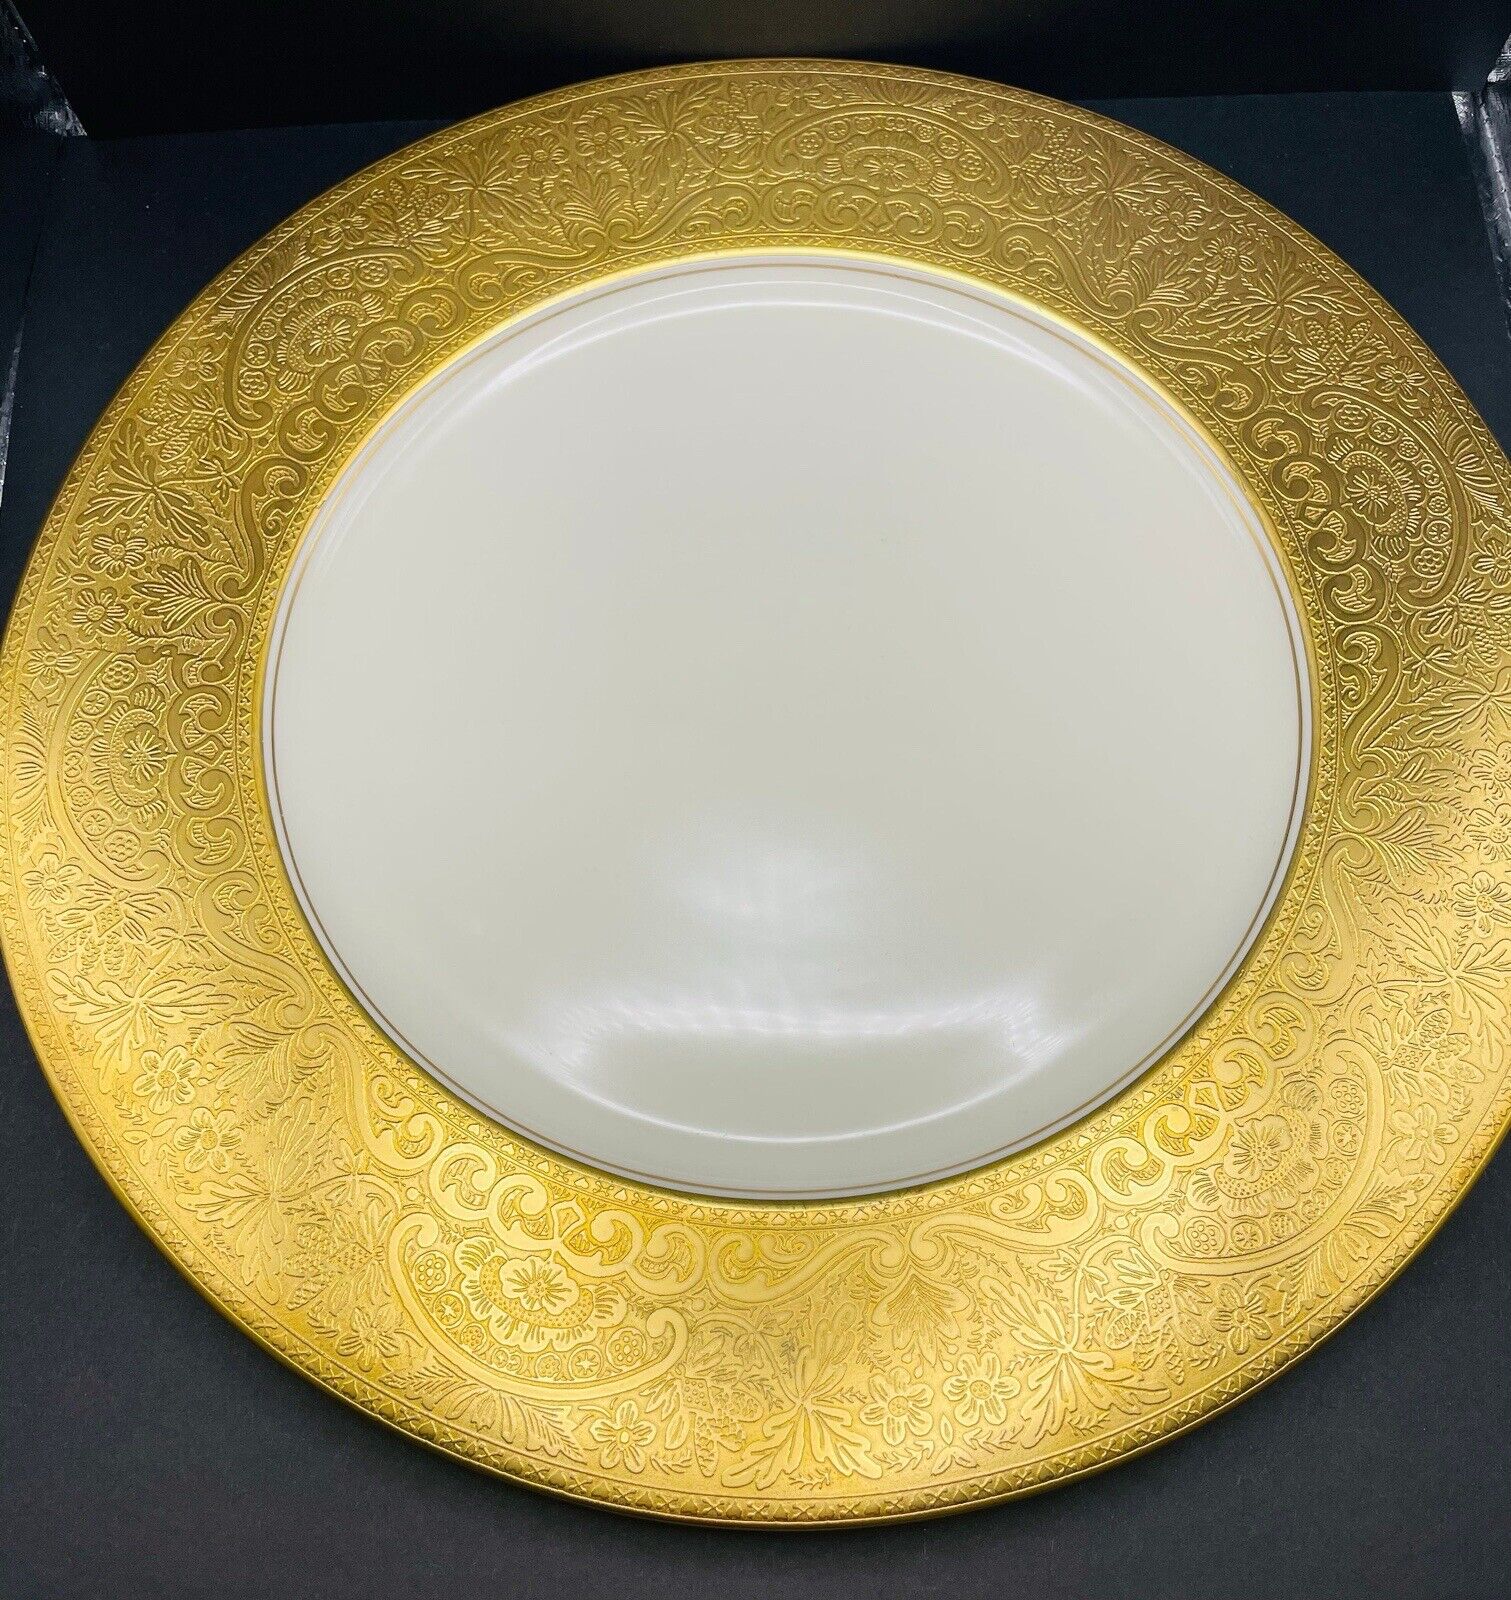 Theodore Haviland Limoges Concorde Fine China Plate With Gold Encrusted Rim.